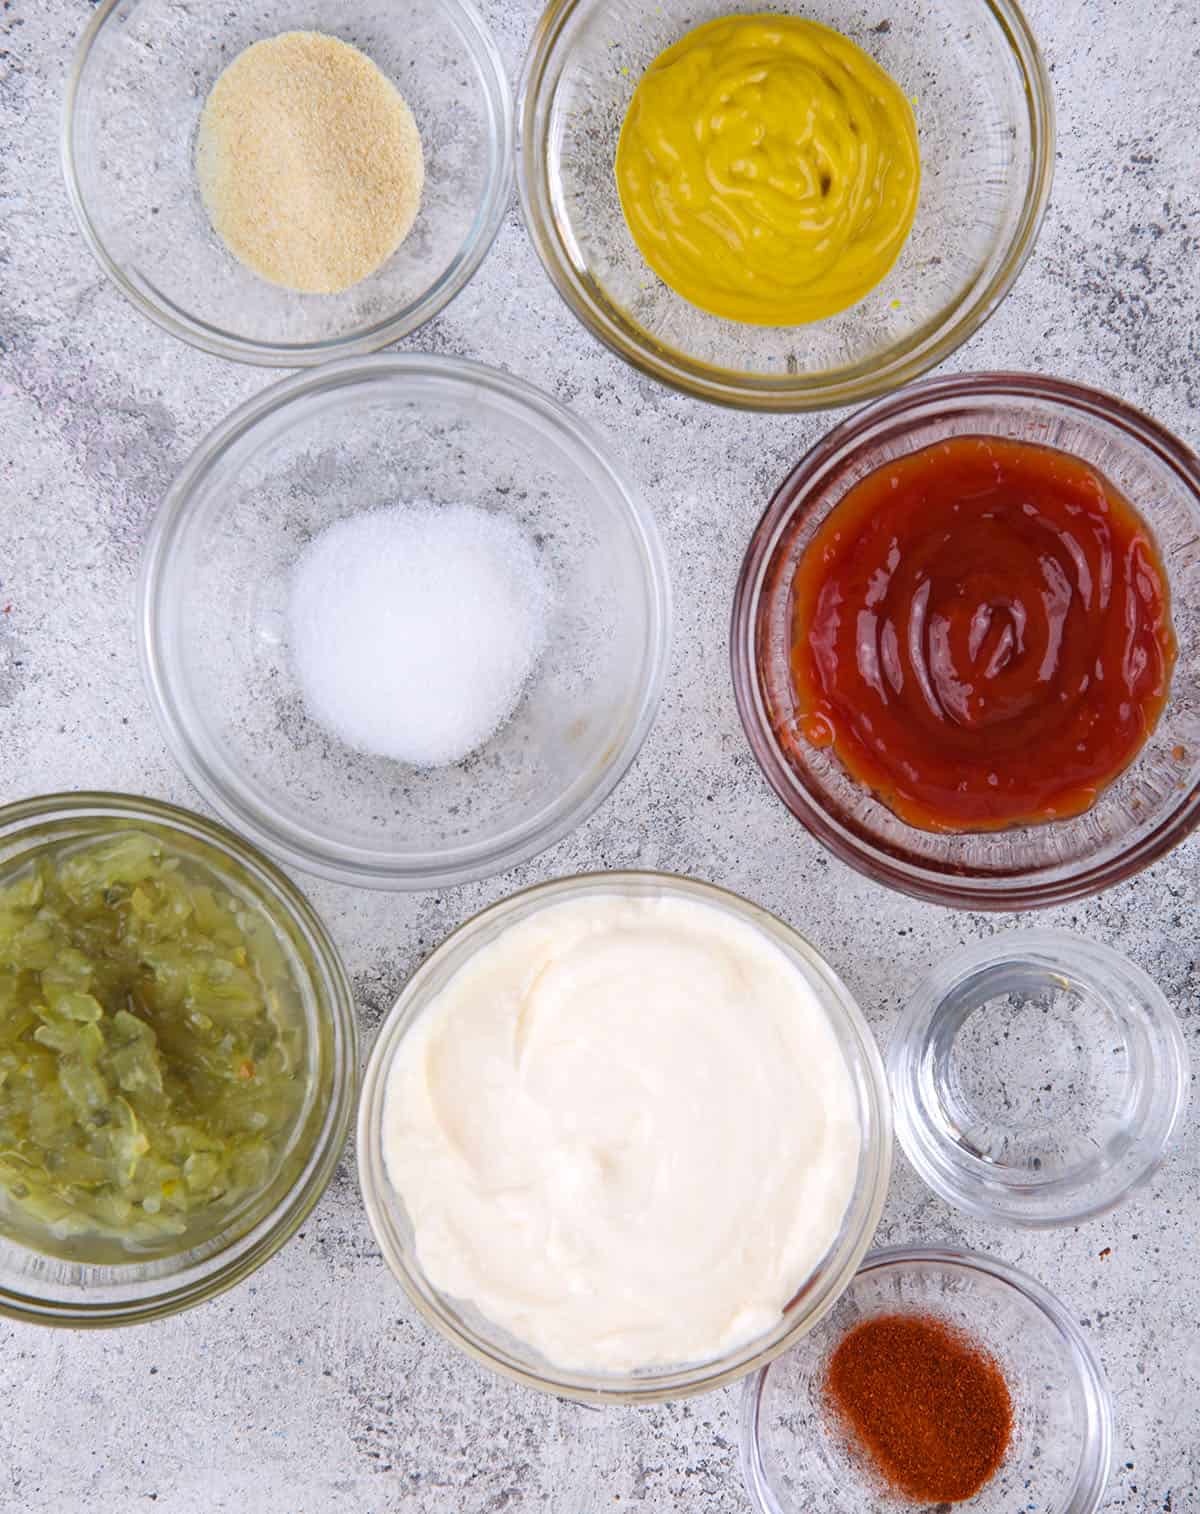 All of the ingredients for big mac sauce are spread out on a counter. 